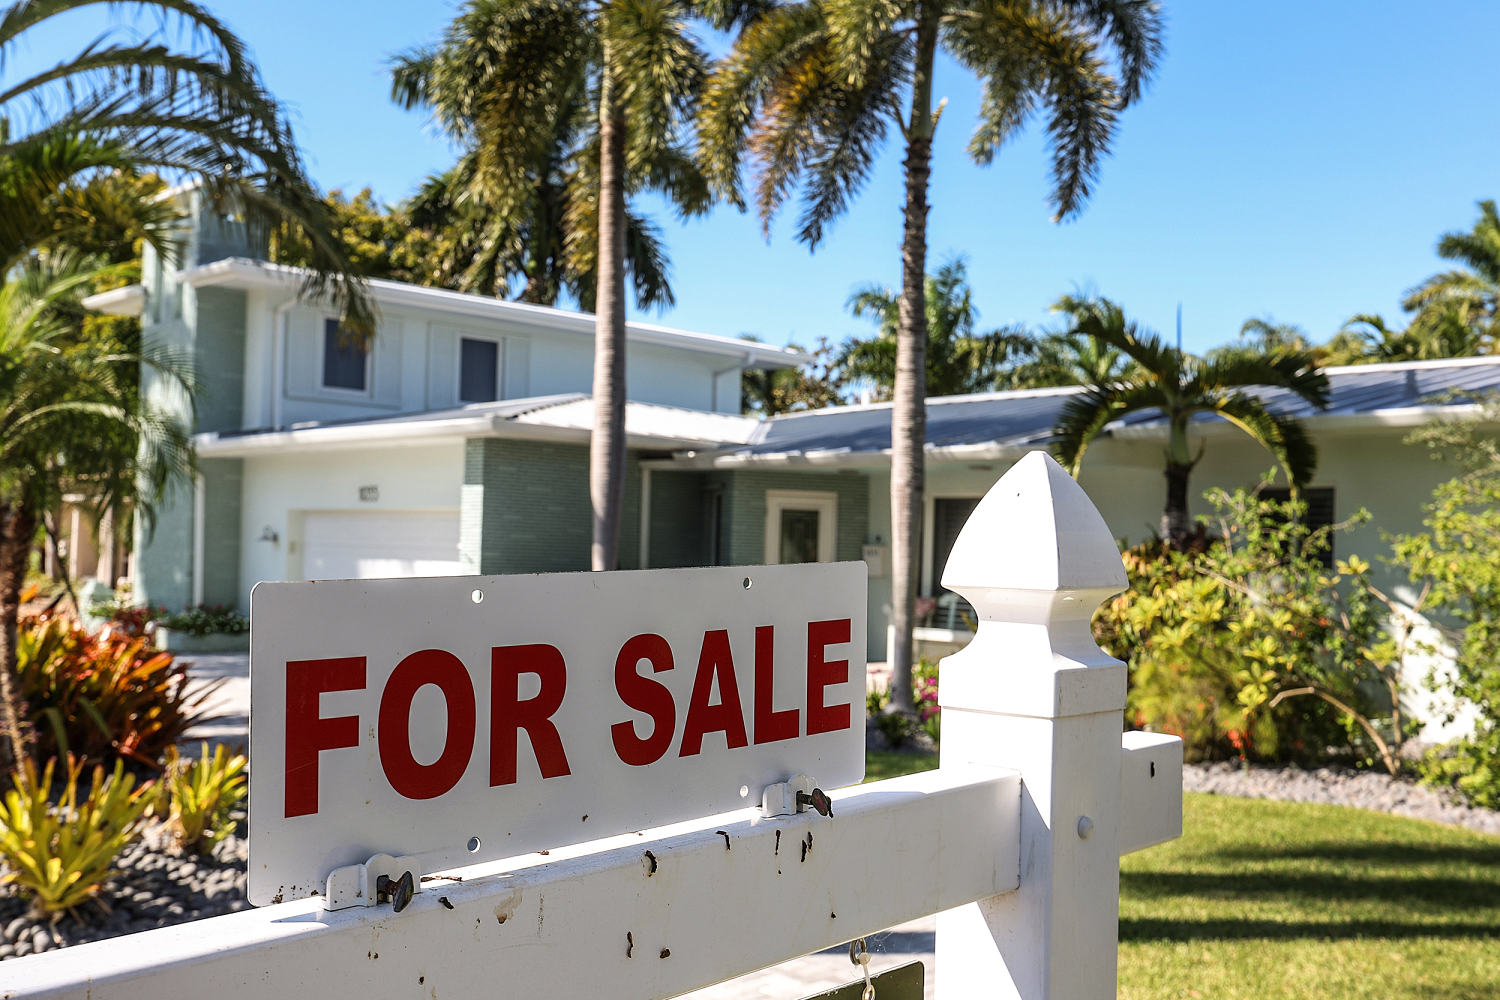 Court blocks Florida law barring Chinese citizens from owning property